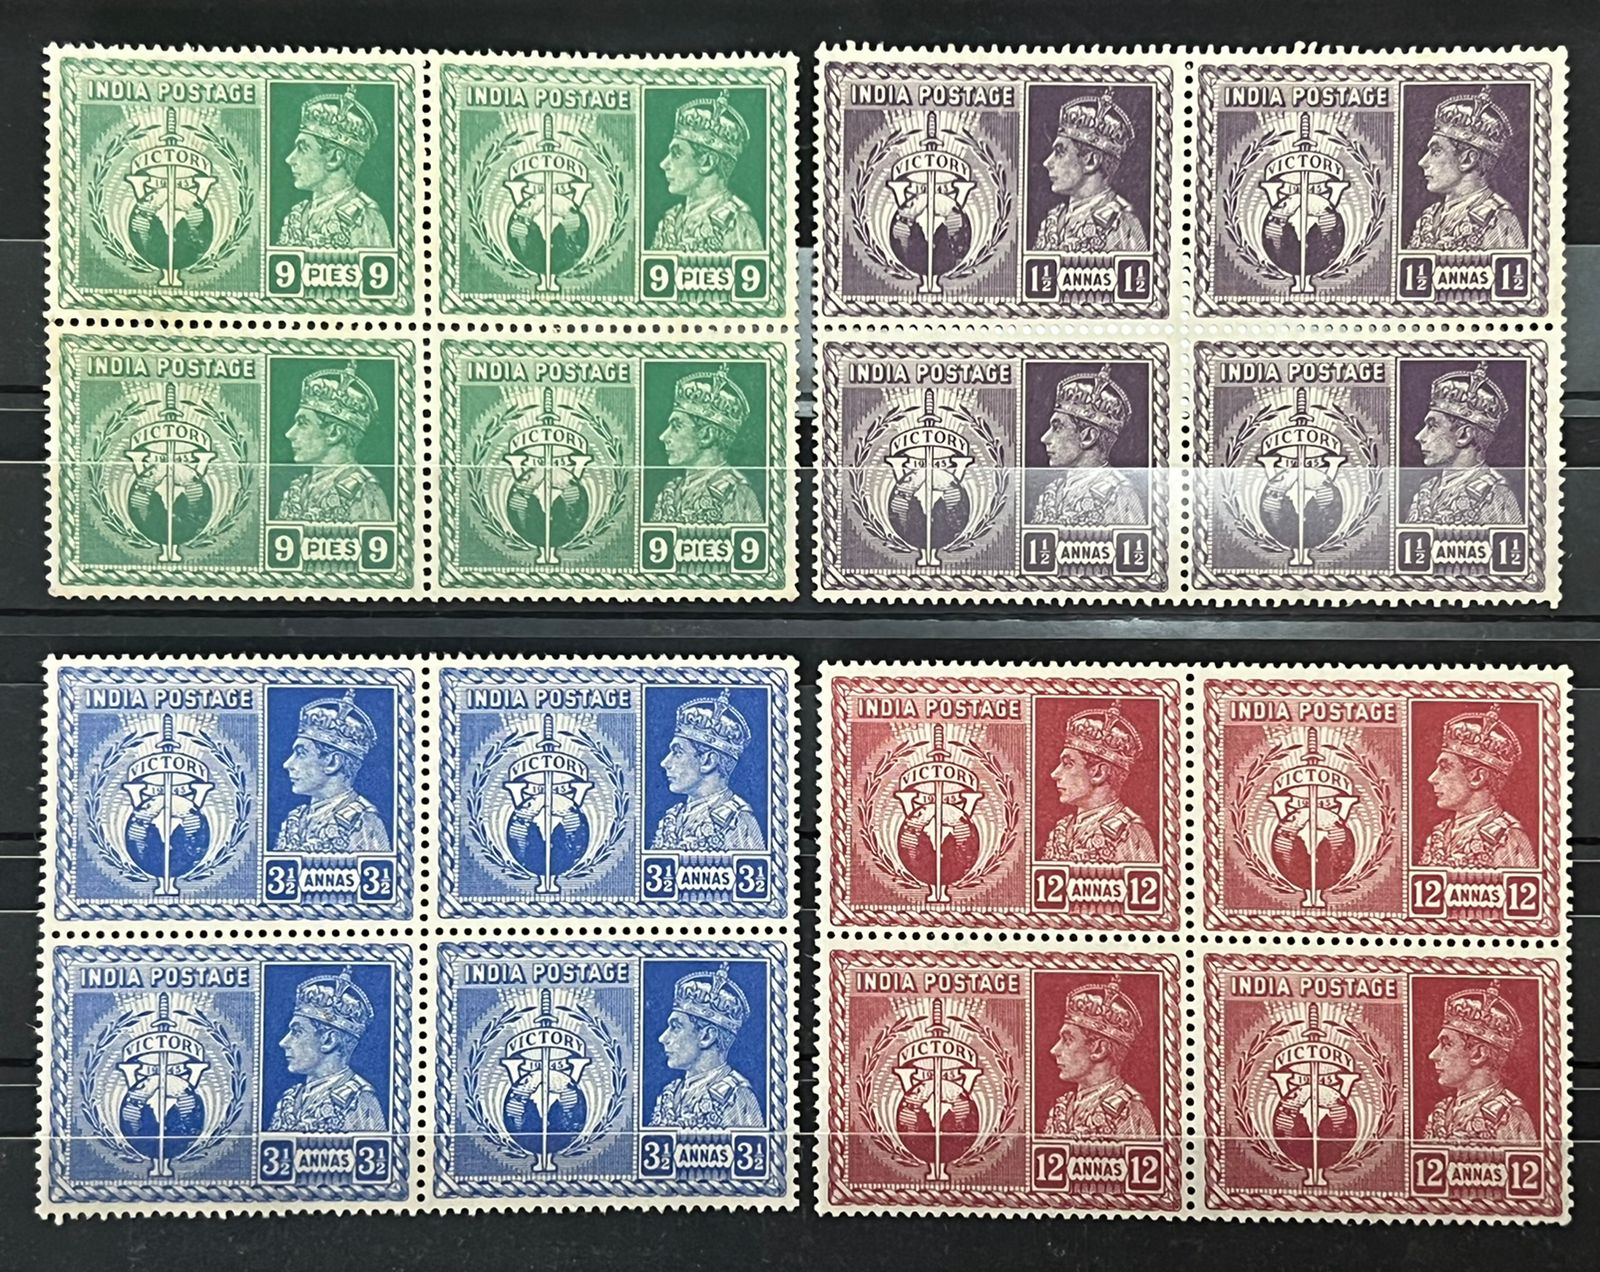 India 1946 KGVI Victory Issue in blocks of 4 Mint NH White Gum Cat Value 2000/- for singles